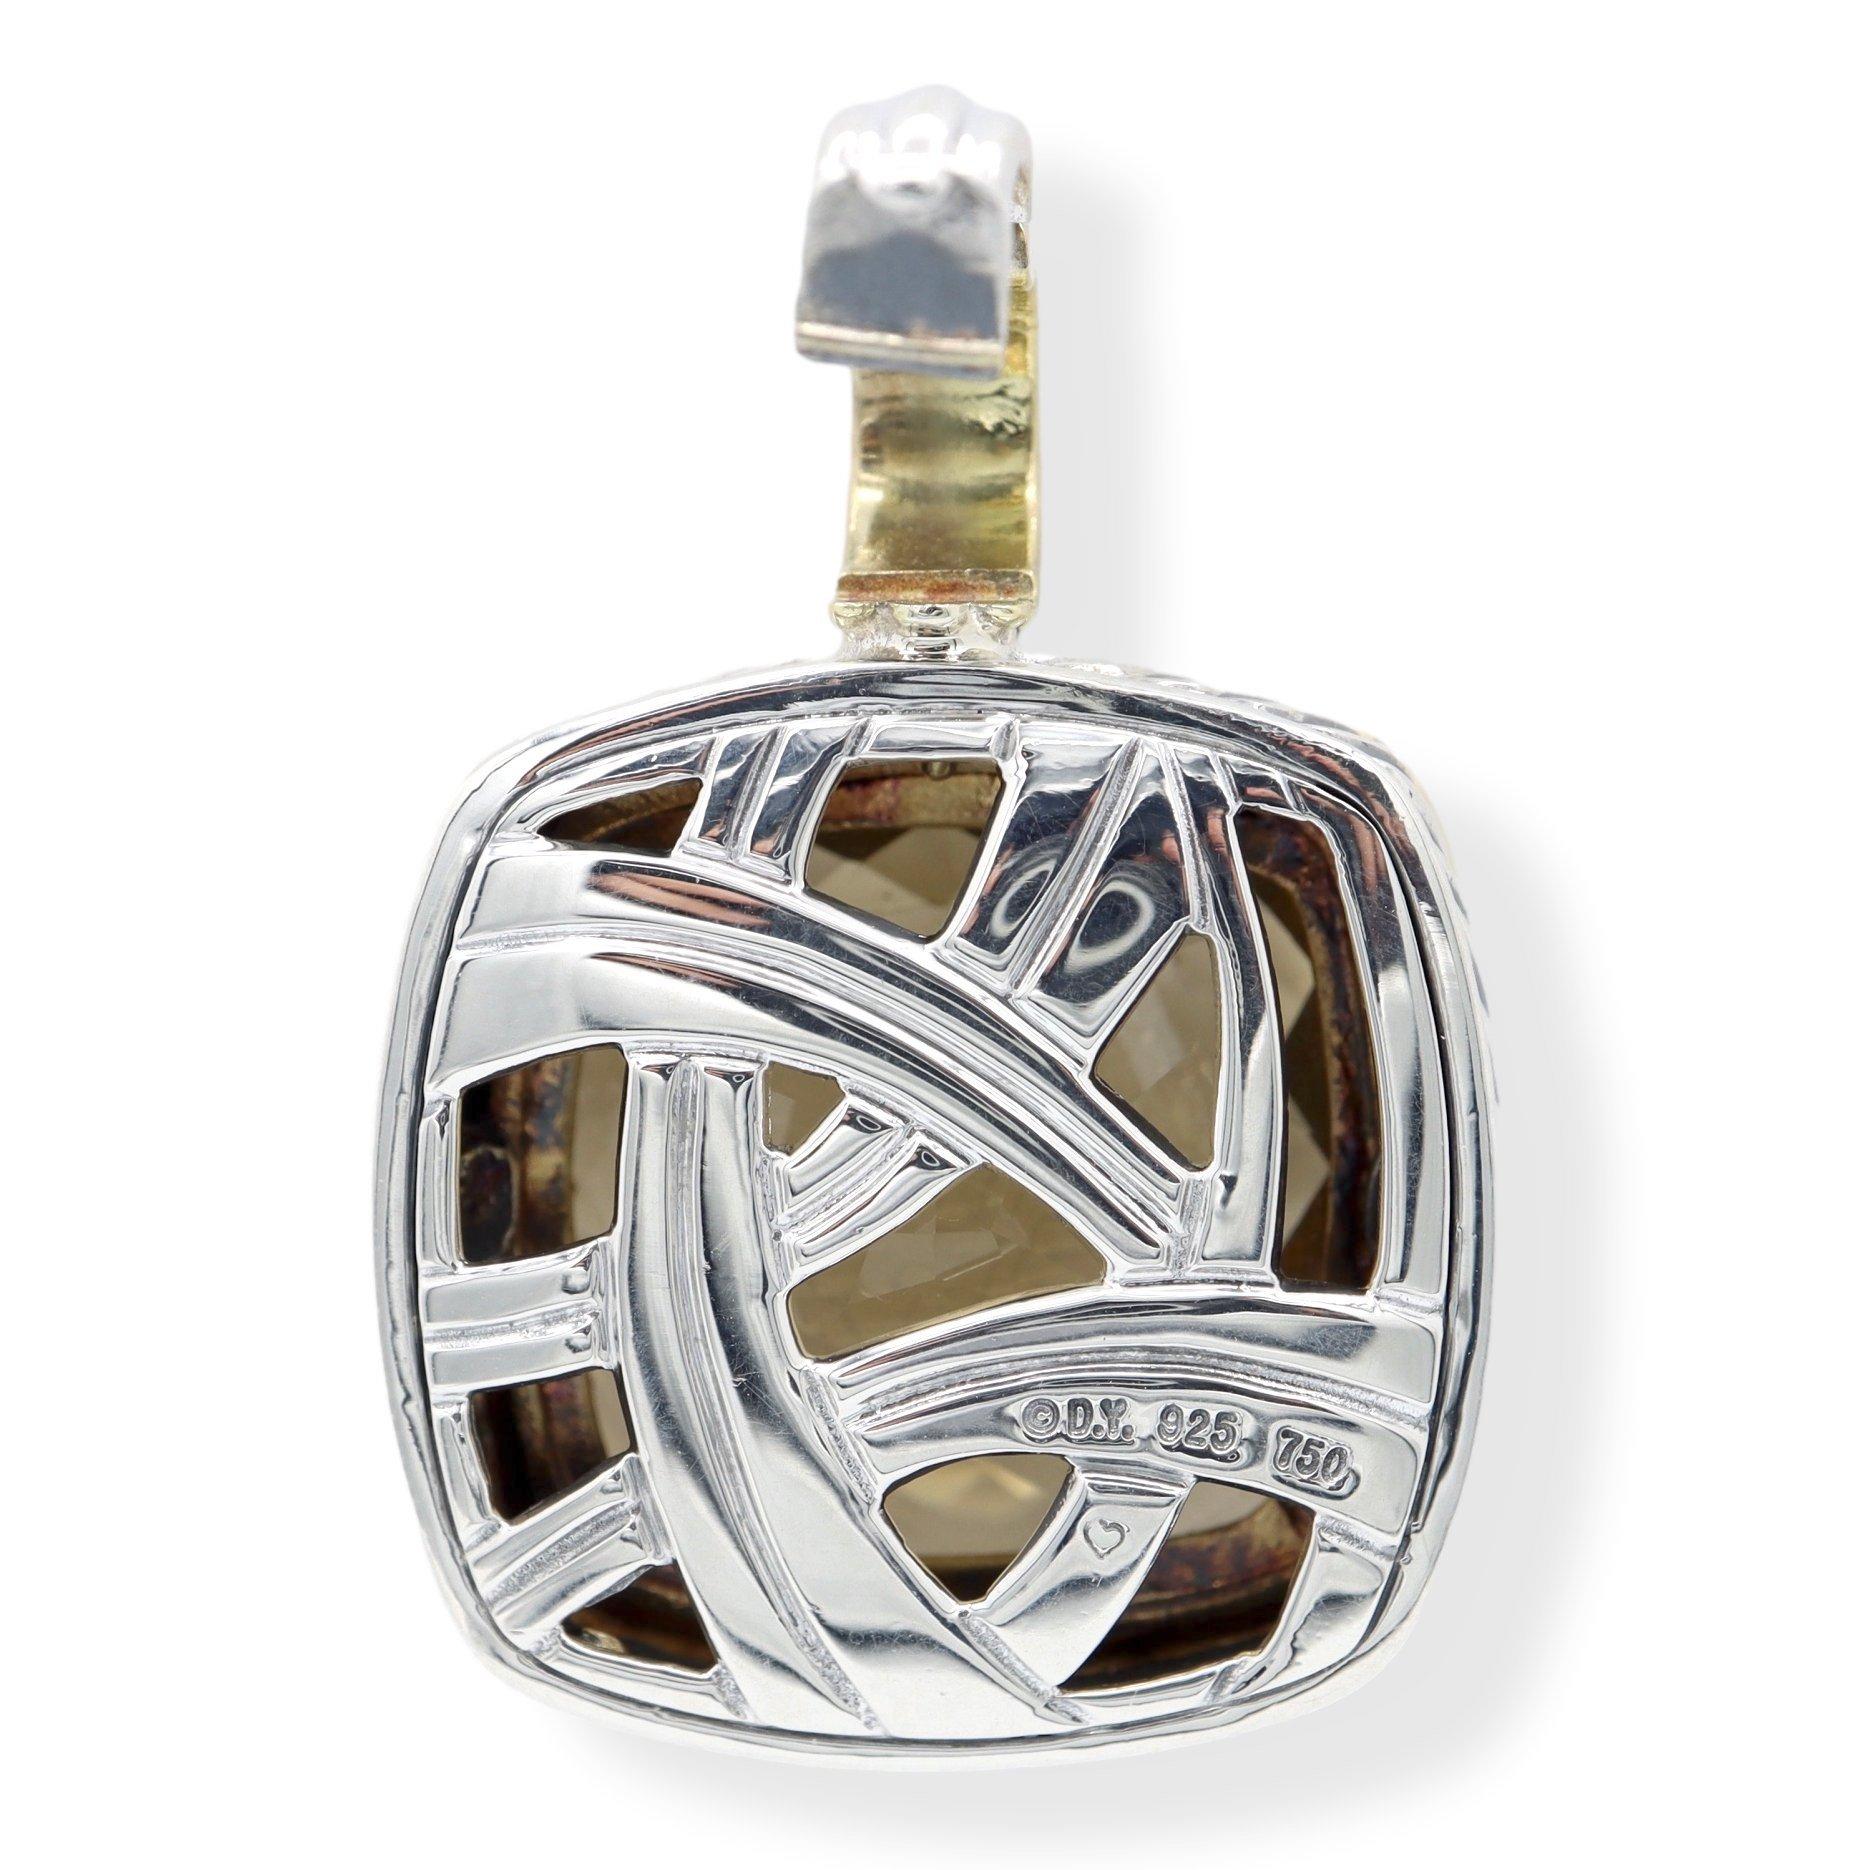 David Yurman pendant finely crafted in sterling silver featuring a 20 mm center citrine set inside an 18 karat yellow gold bezel on top of the classic cable design. Pendant has a clip bale to easily adapt to necklace. Fully hallmarked with logo and